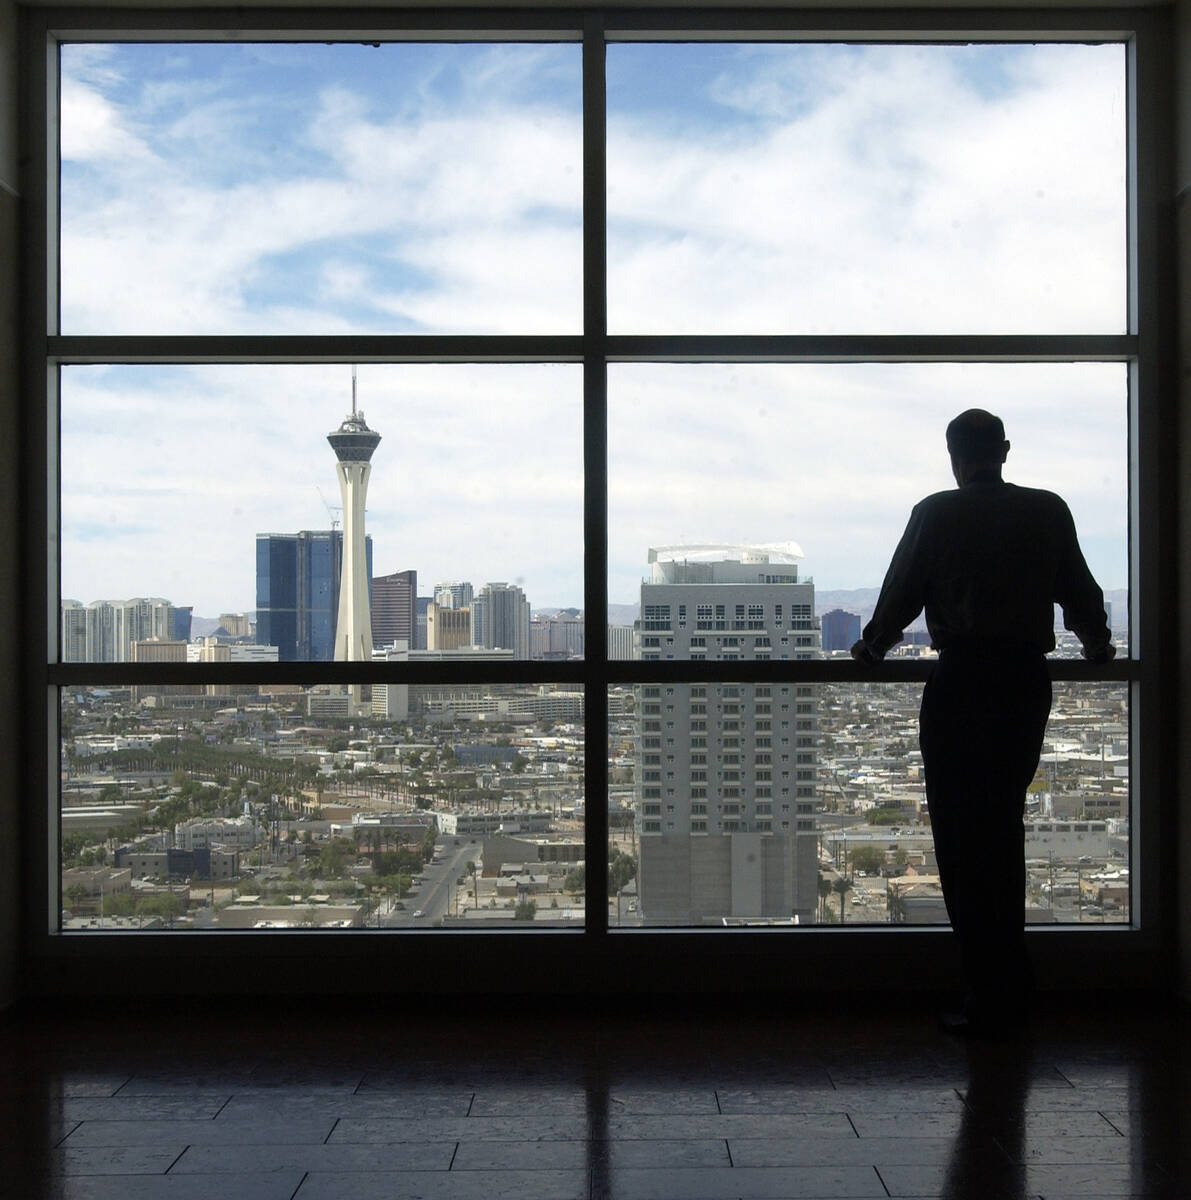 DAVID BECKER/LAS VEGAS REVIEW JOURNAL COURT HOUSE VIEW – A lone onlooker takes in the vi ...